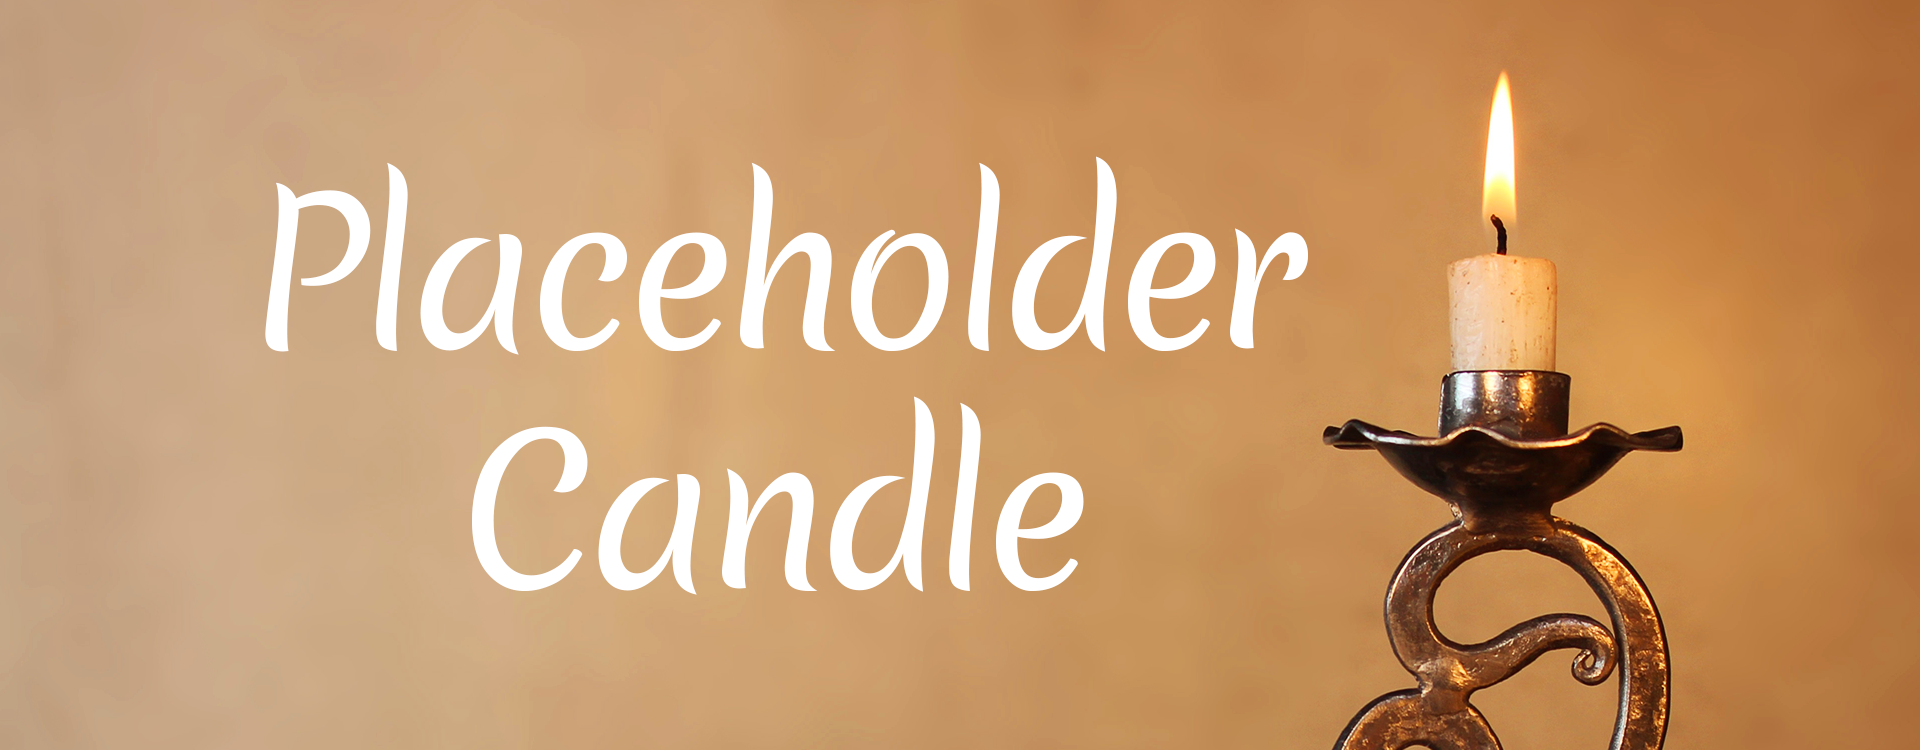 placeholder candle 1920x750